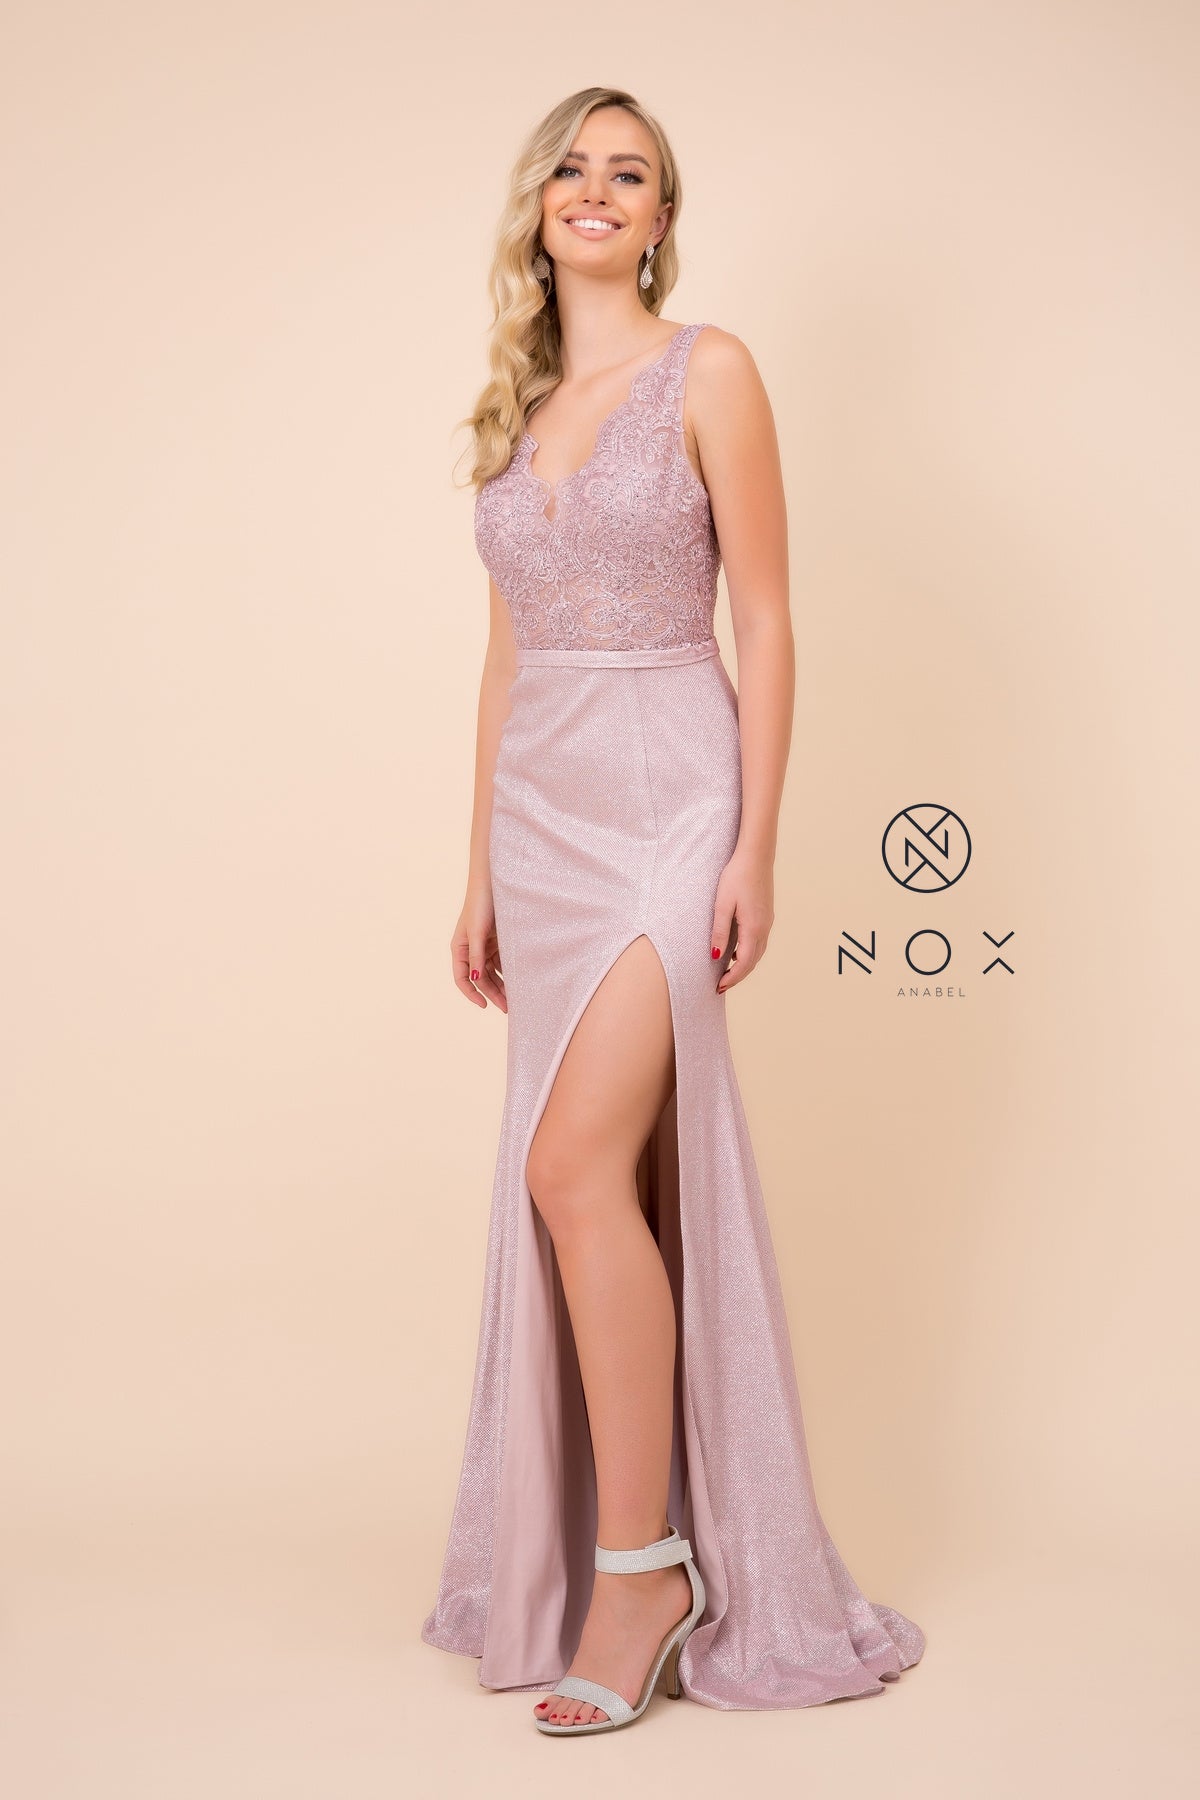 MyFashion.com - LONG MERMAID DRESS WITH LACED BODICE AND V-SHAPED OPEN BACK (E373) - Nox Anabel promdress eveningdress fashion partydress weddingdress 
 gown homecoming promgown weddinggown 